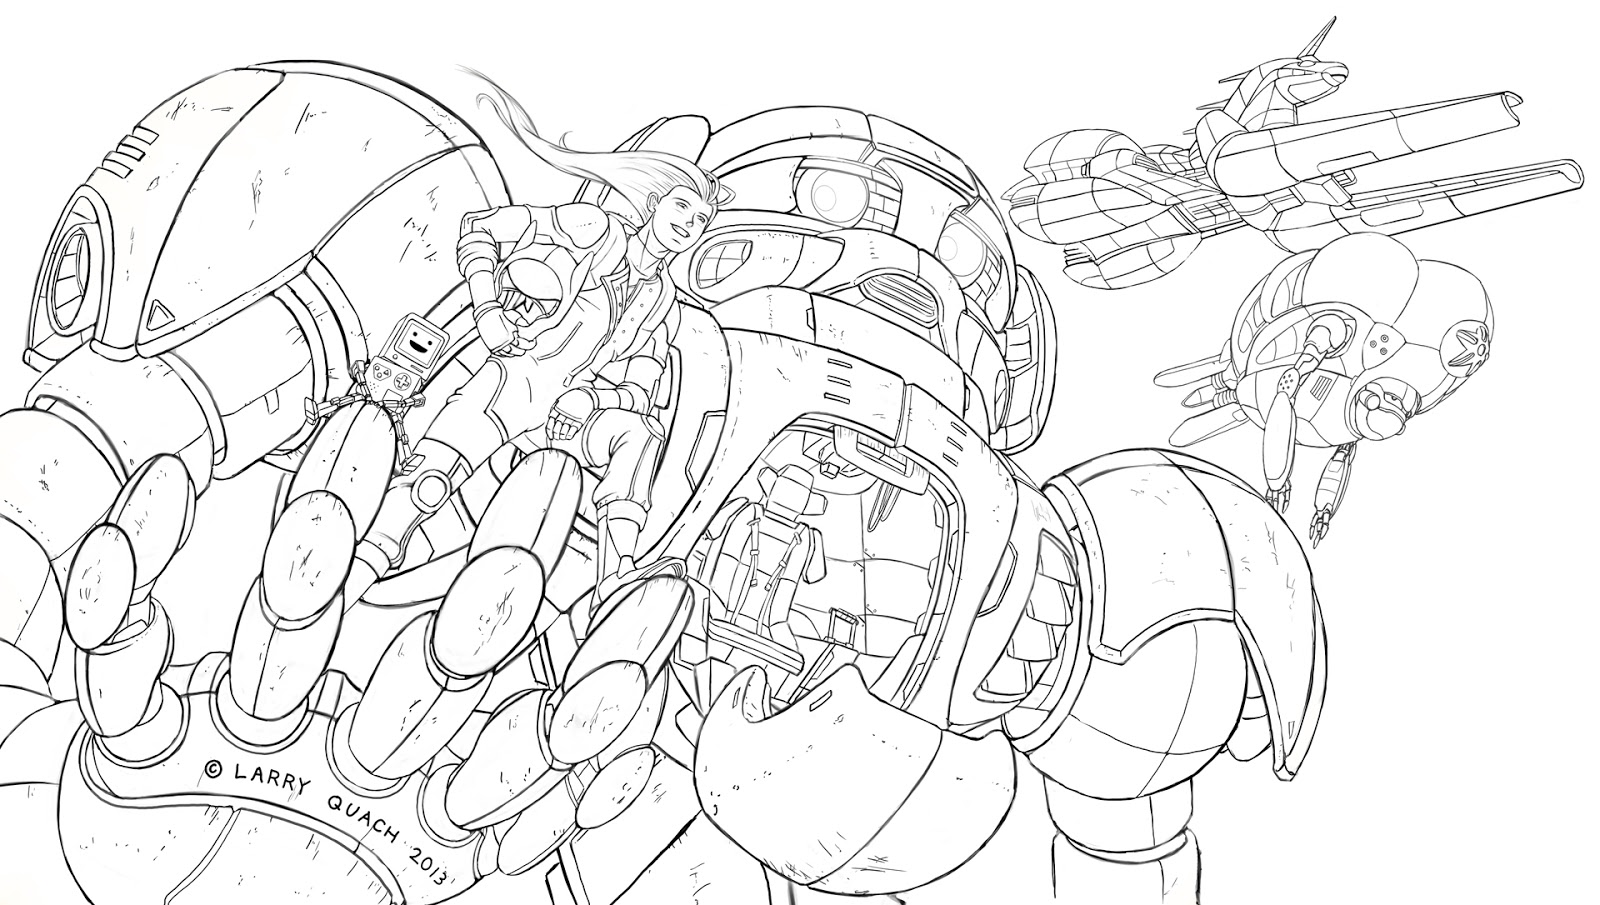 An Adventure Time X Pacific Rim Crossover Might Look Like This